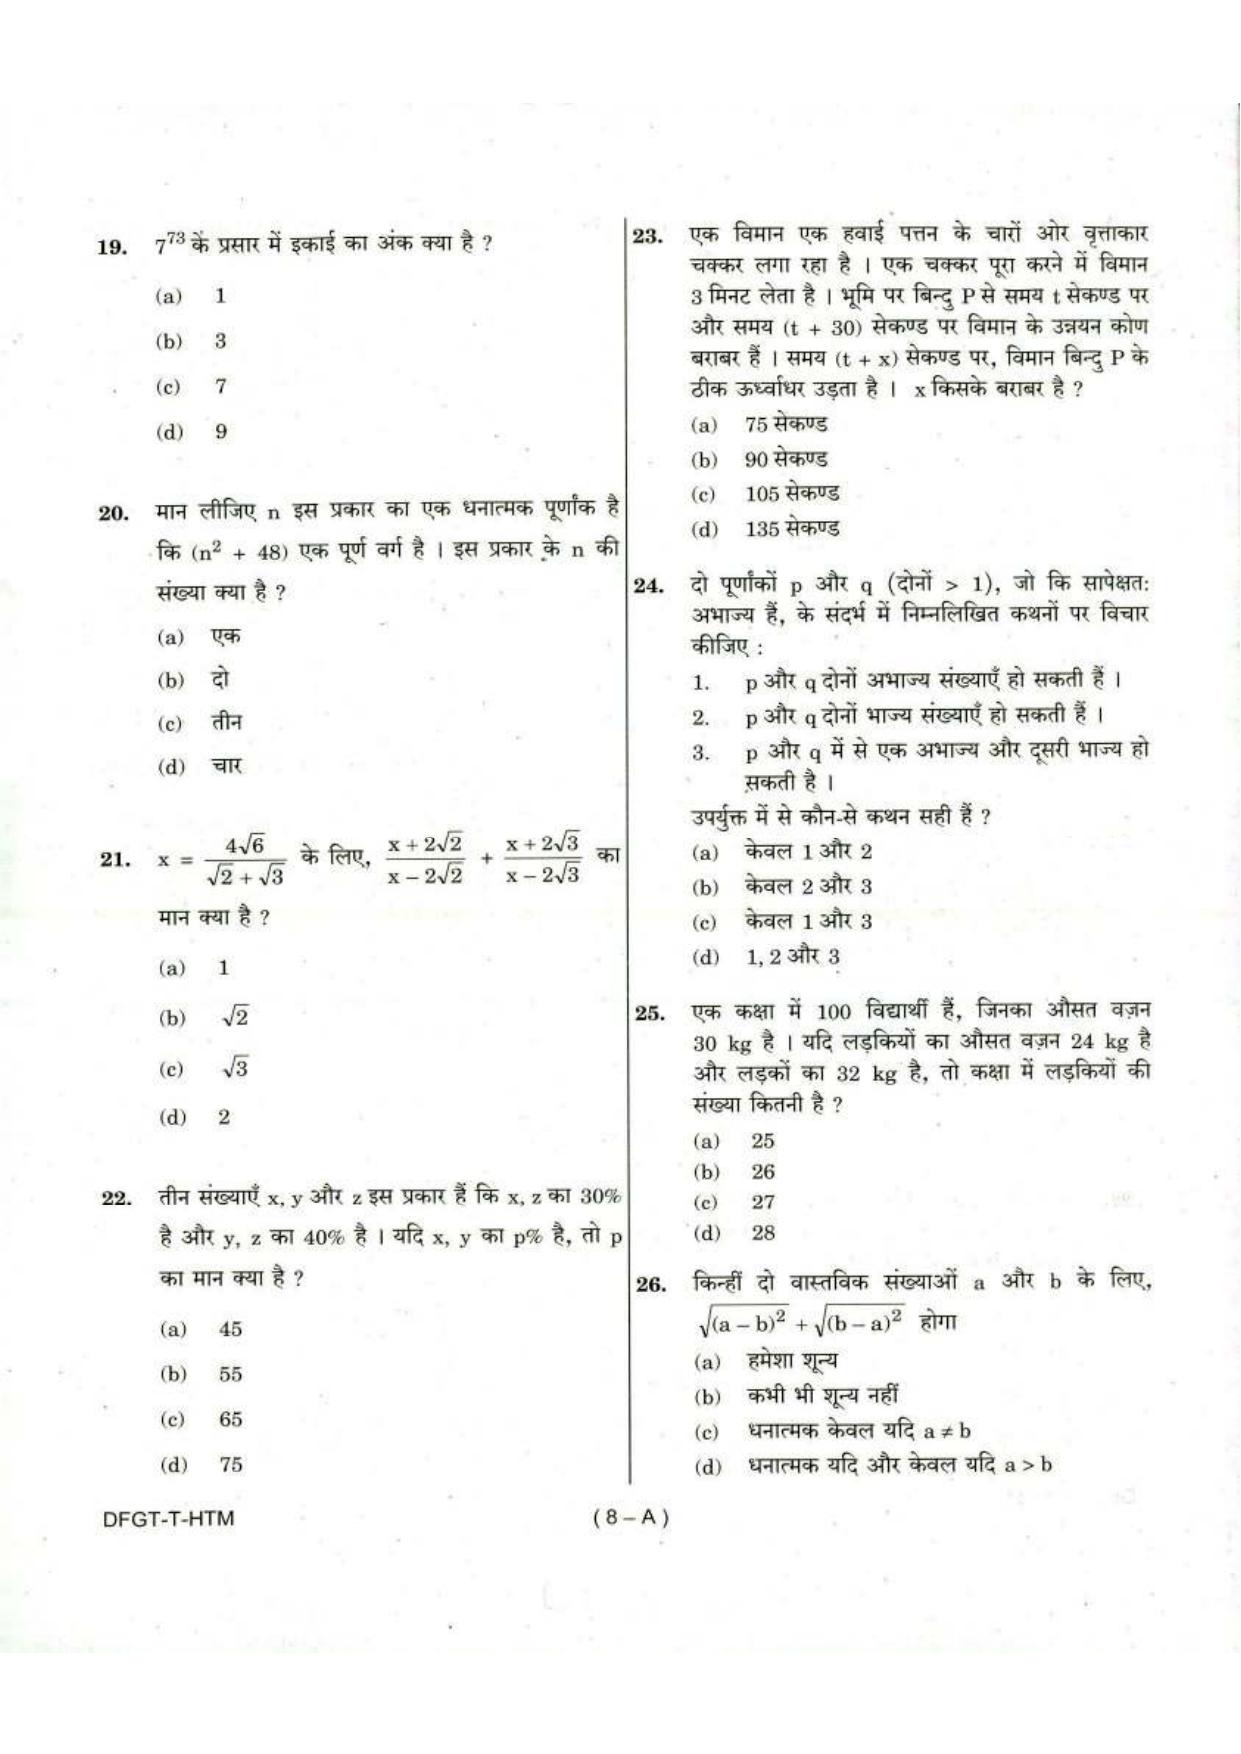 PBSSD Elementary Mathematics Practice Papers For BLS, PADEO & Other Posts - Page 8